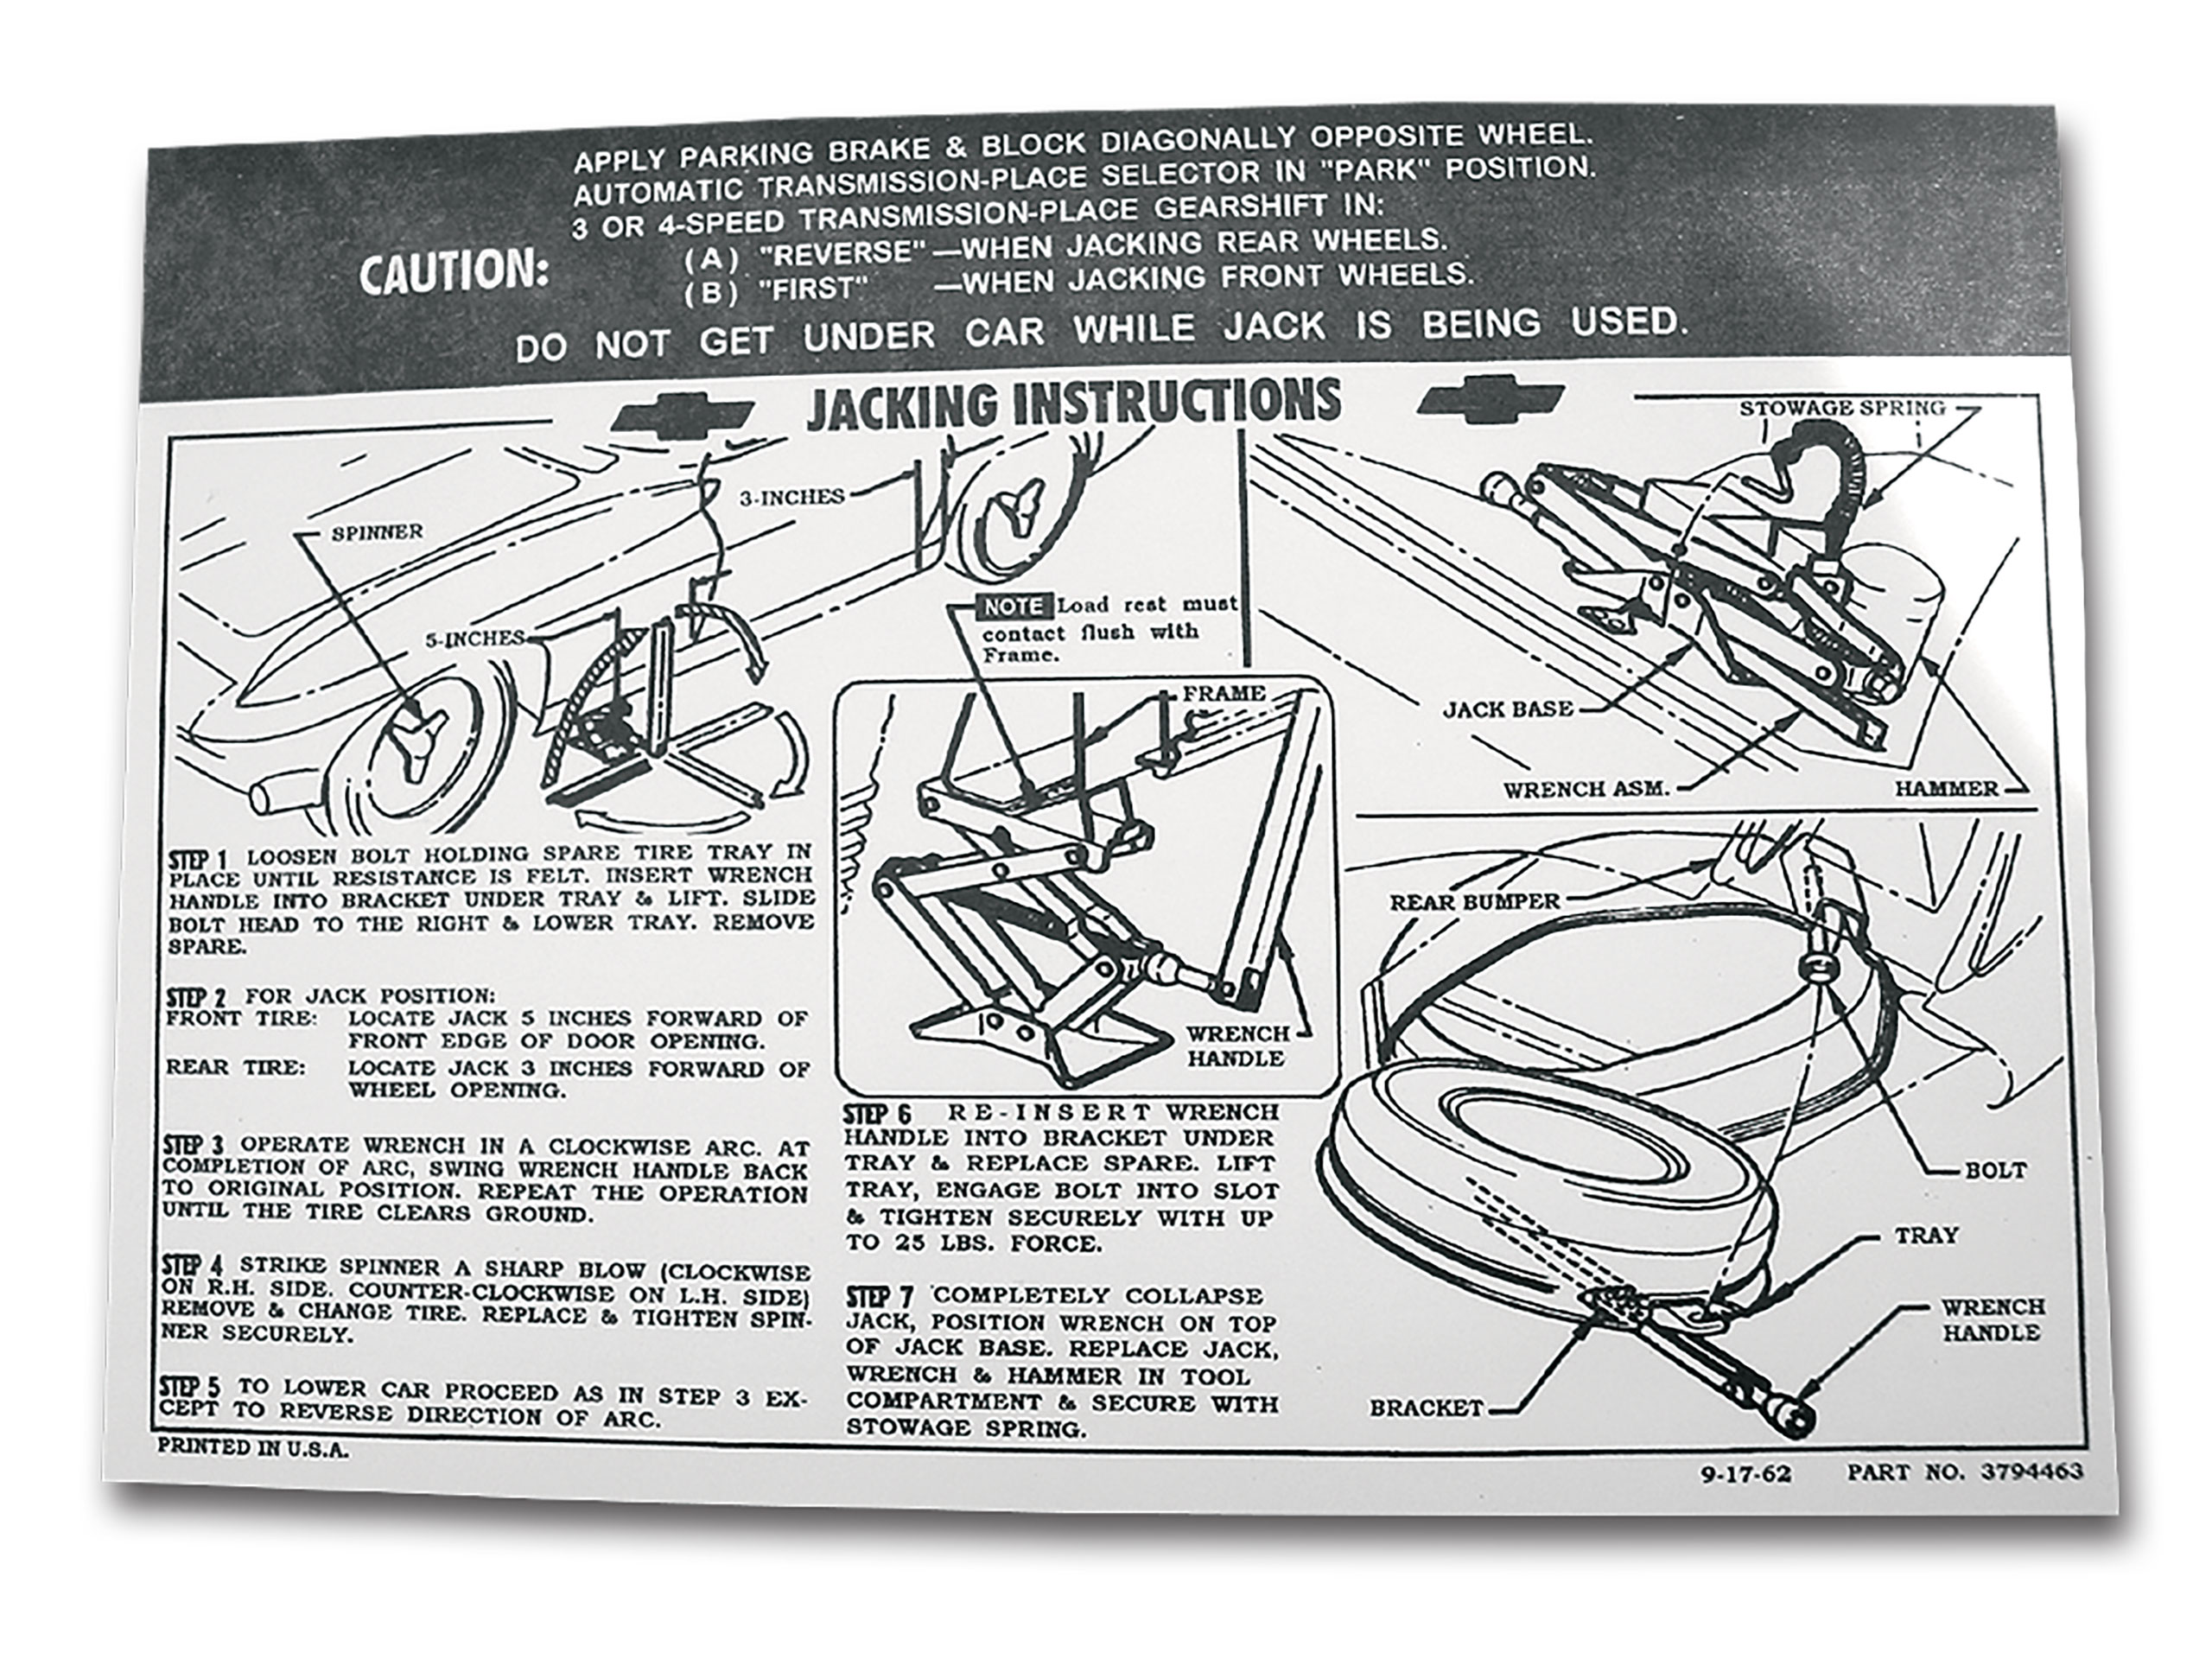 C2 1963-1966 Chevrolet Corvette Decal. Jacking Instruction W/Knock-Off Wheel - Auto Accessories of America